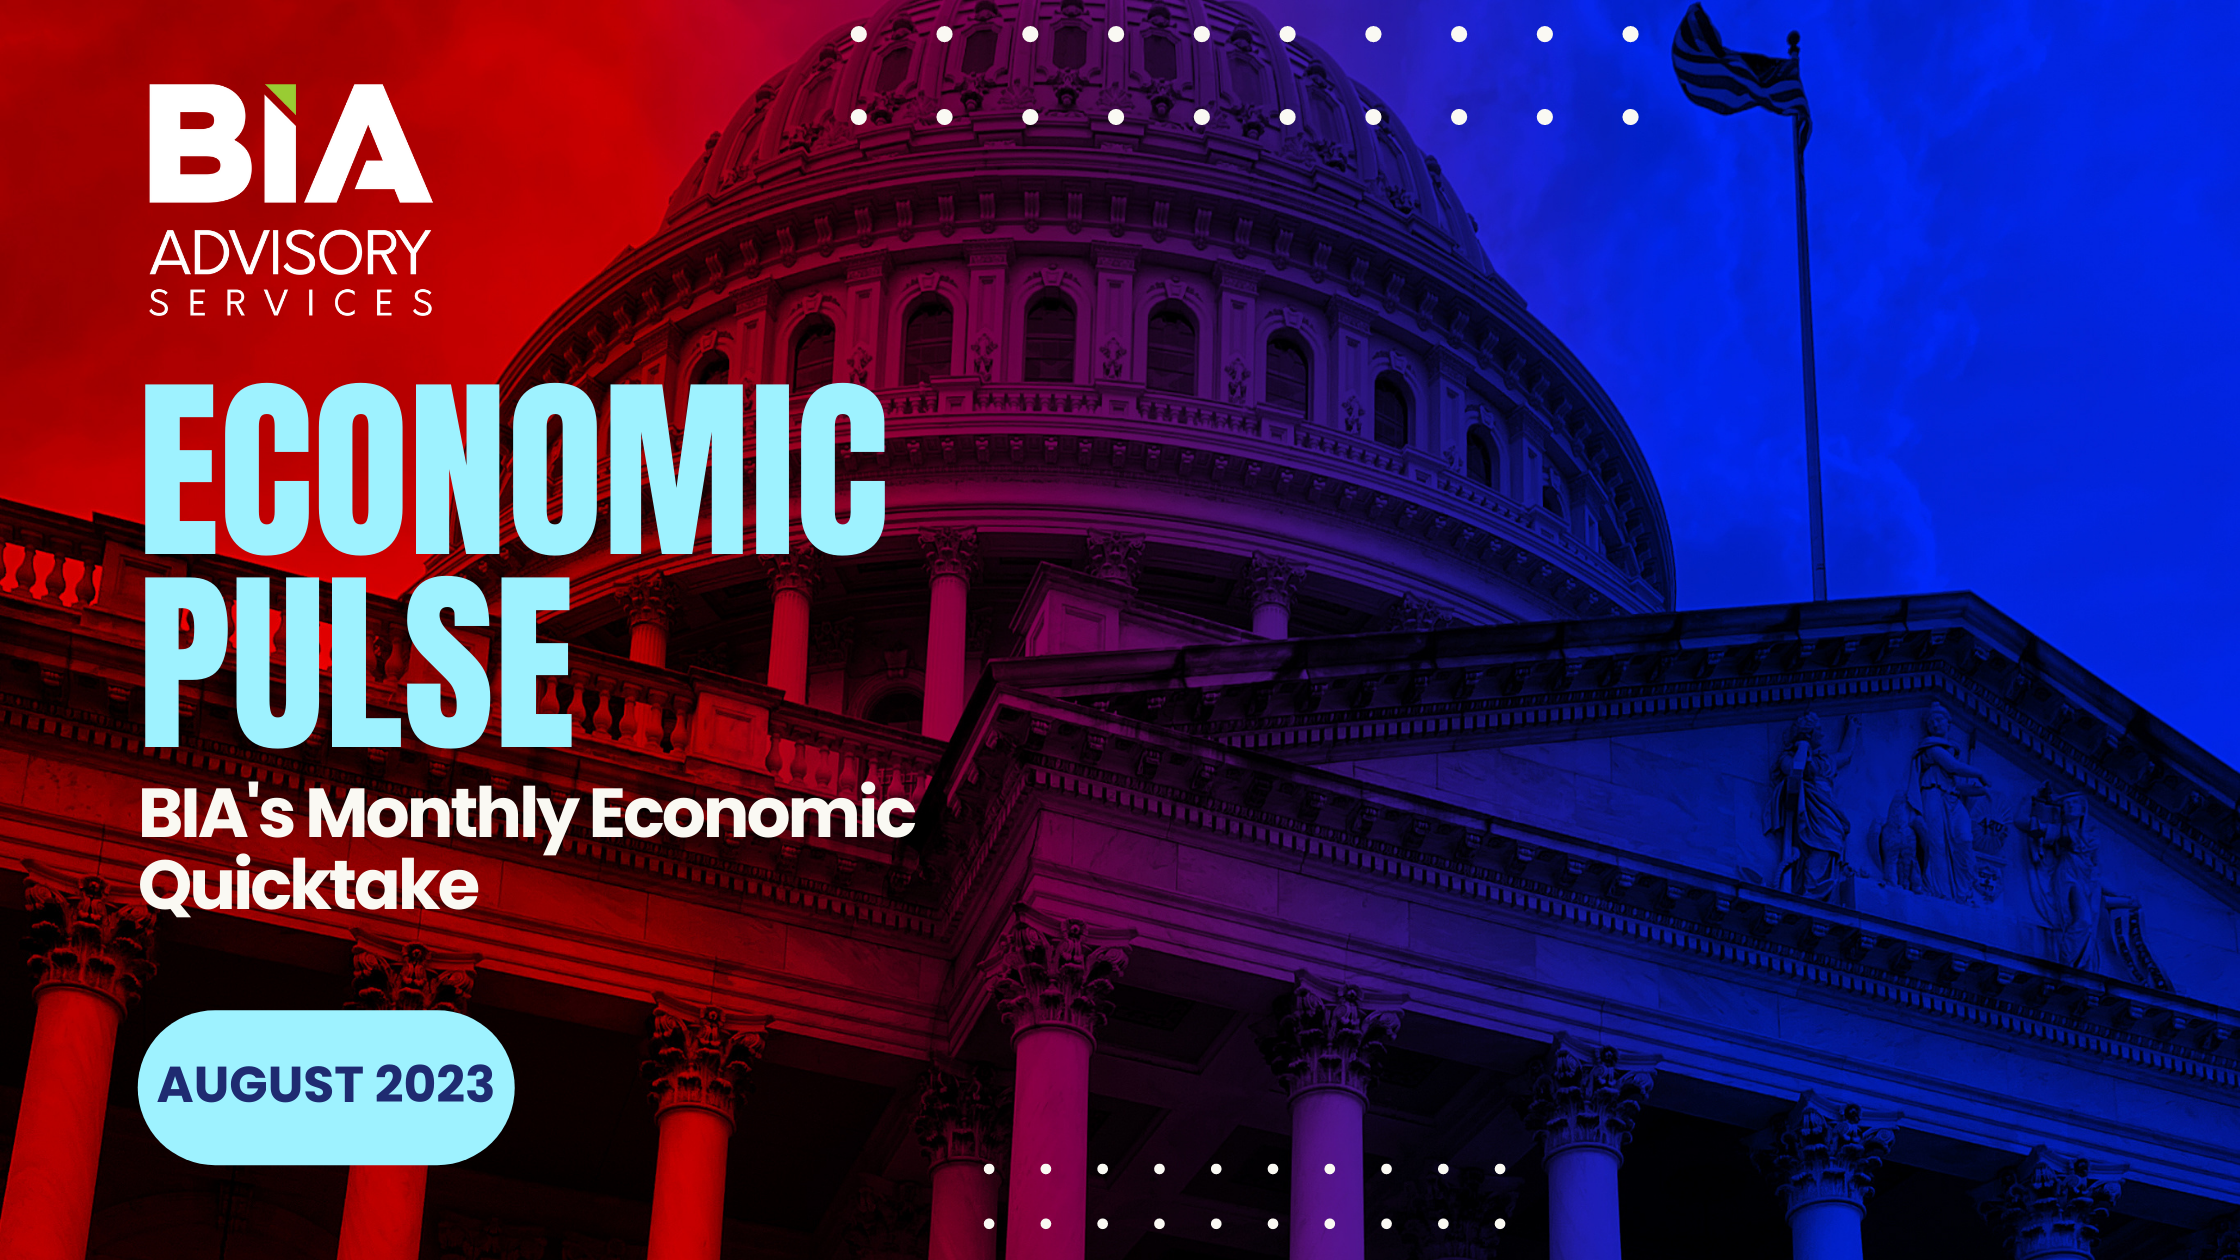 Economic Pulse: BIA’s Monthly Quick Take For August 2023